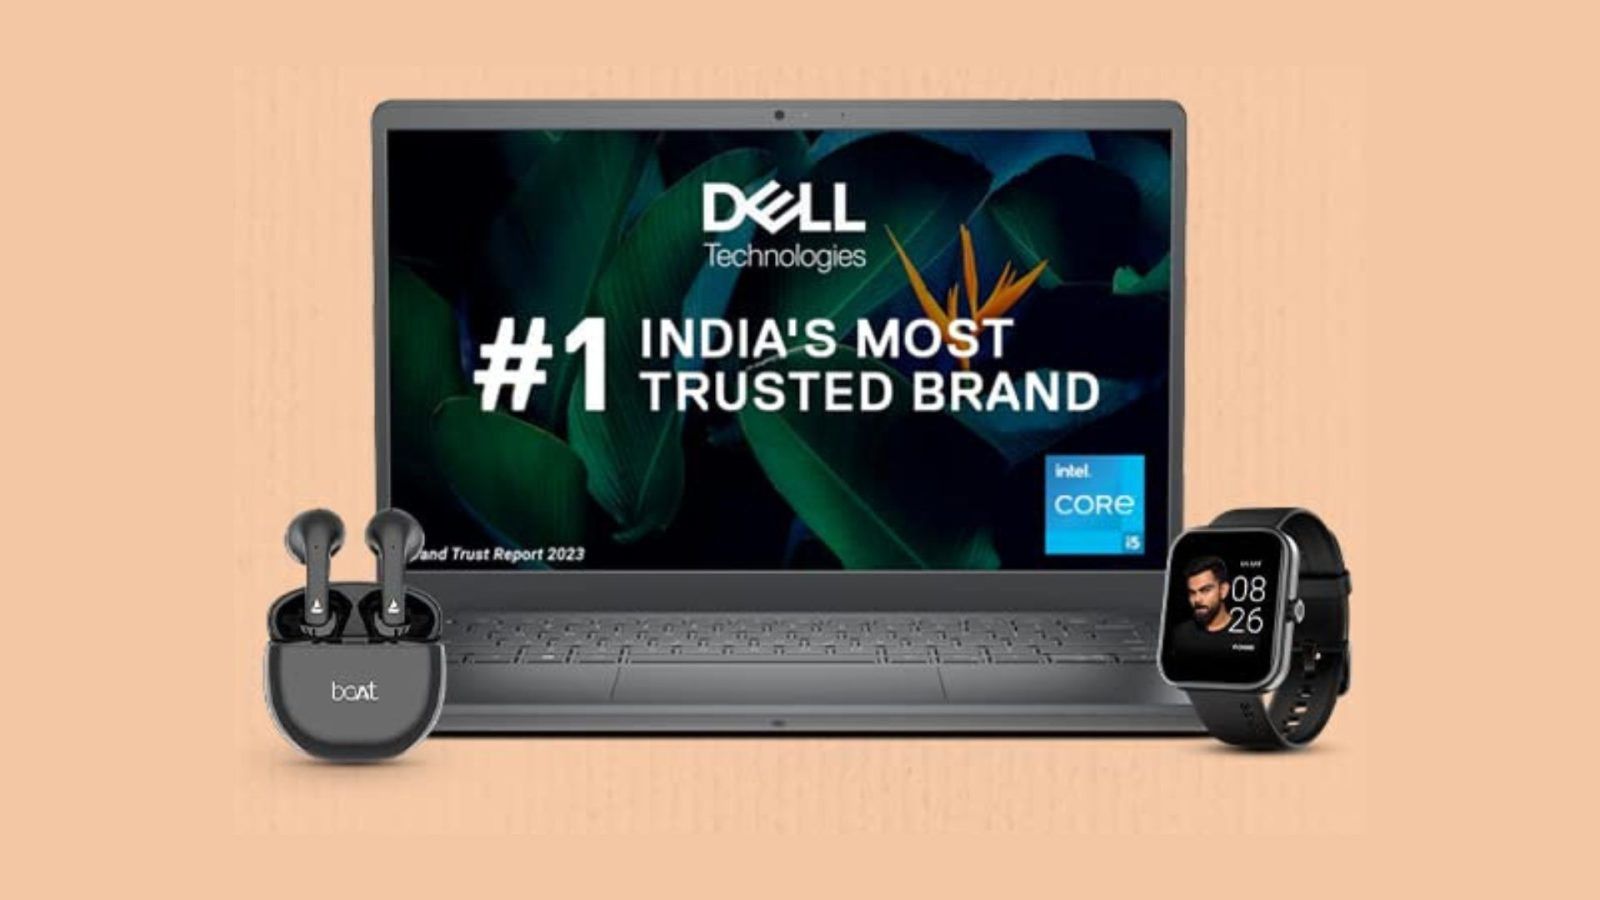 Prime Day Sale: Best Last-Minute Deals On Mobiles, Laptops,  Headphones And More - News18